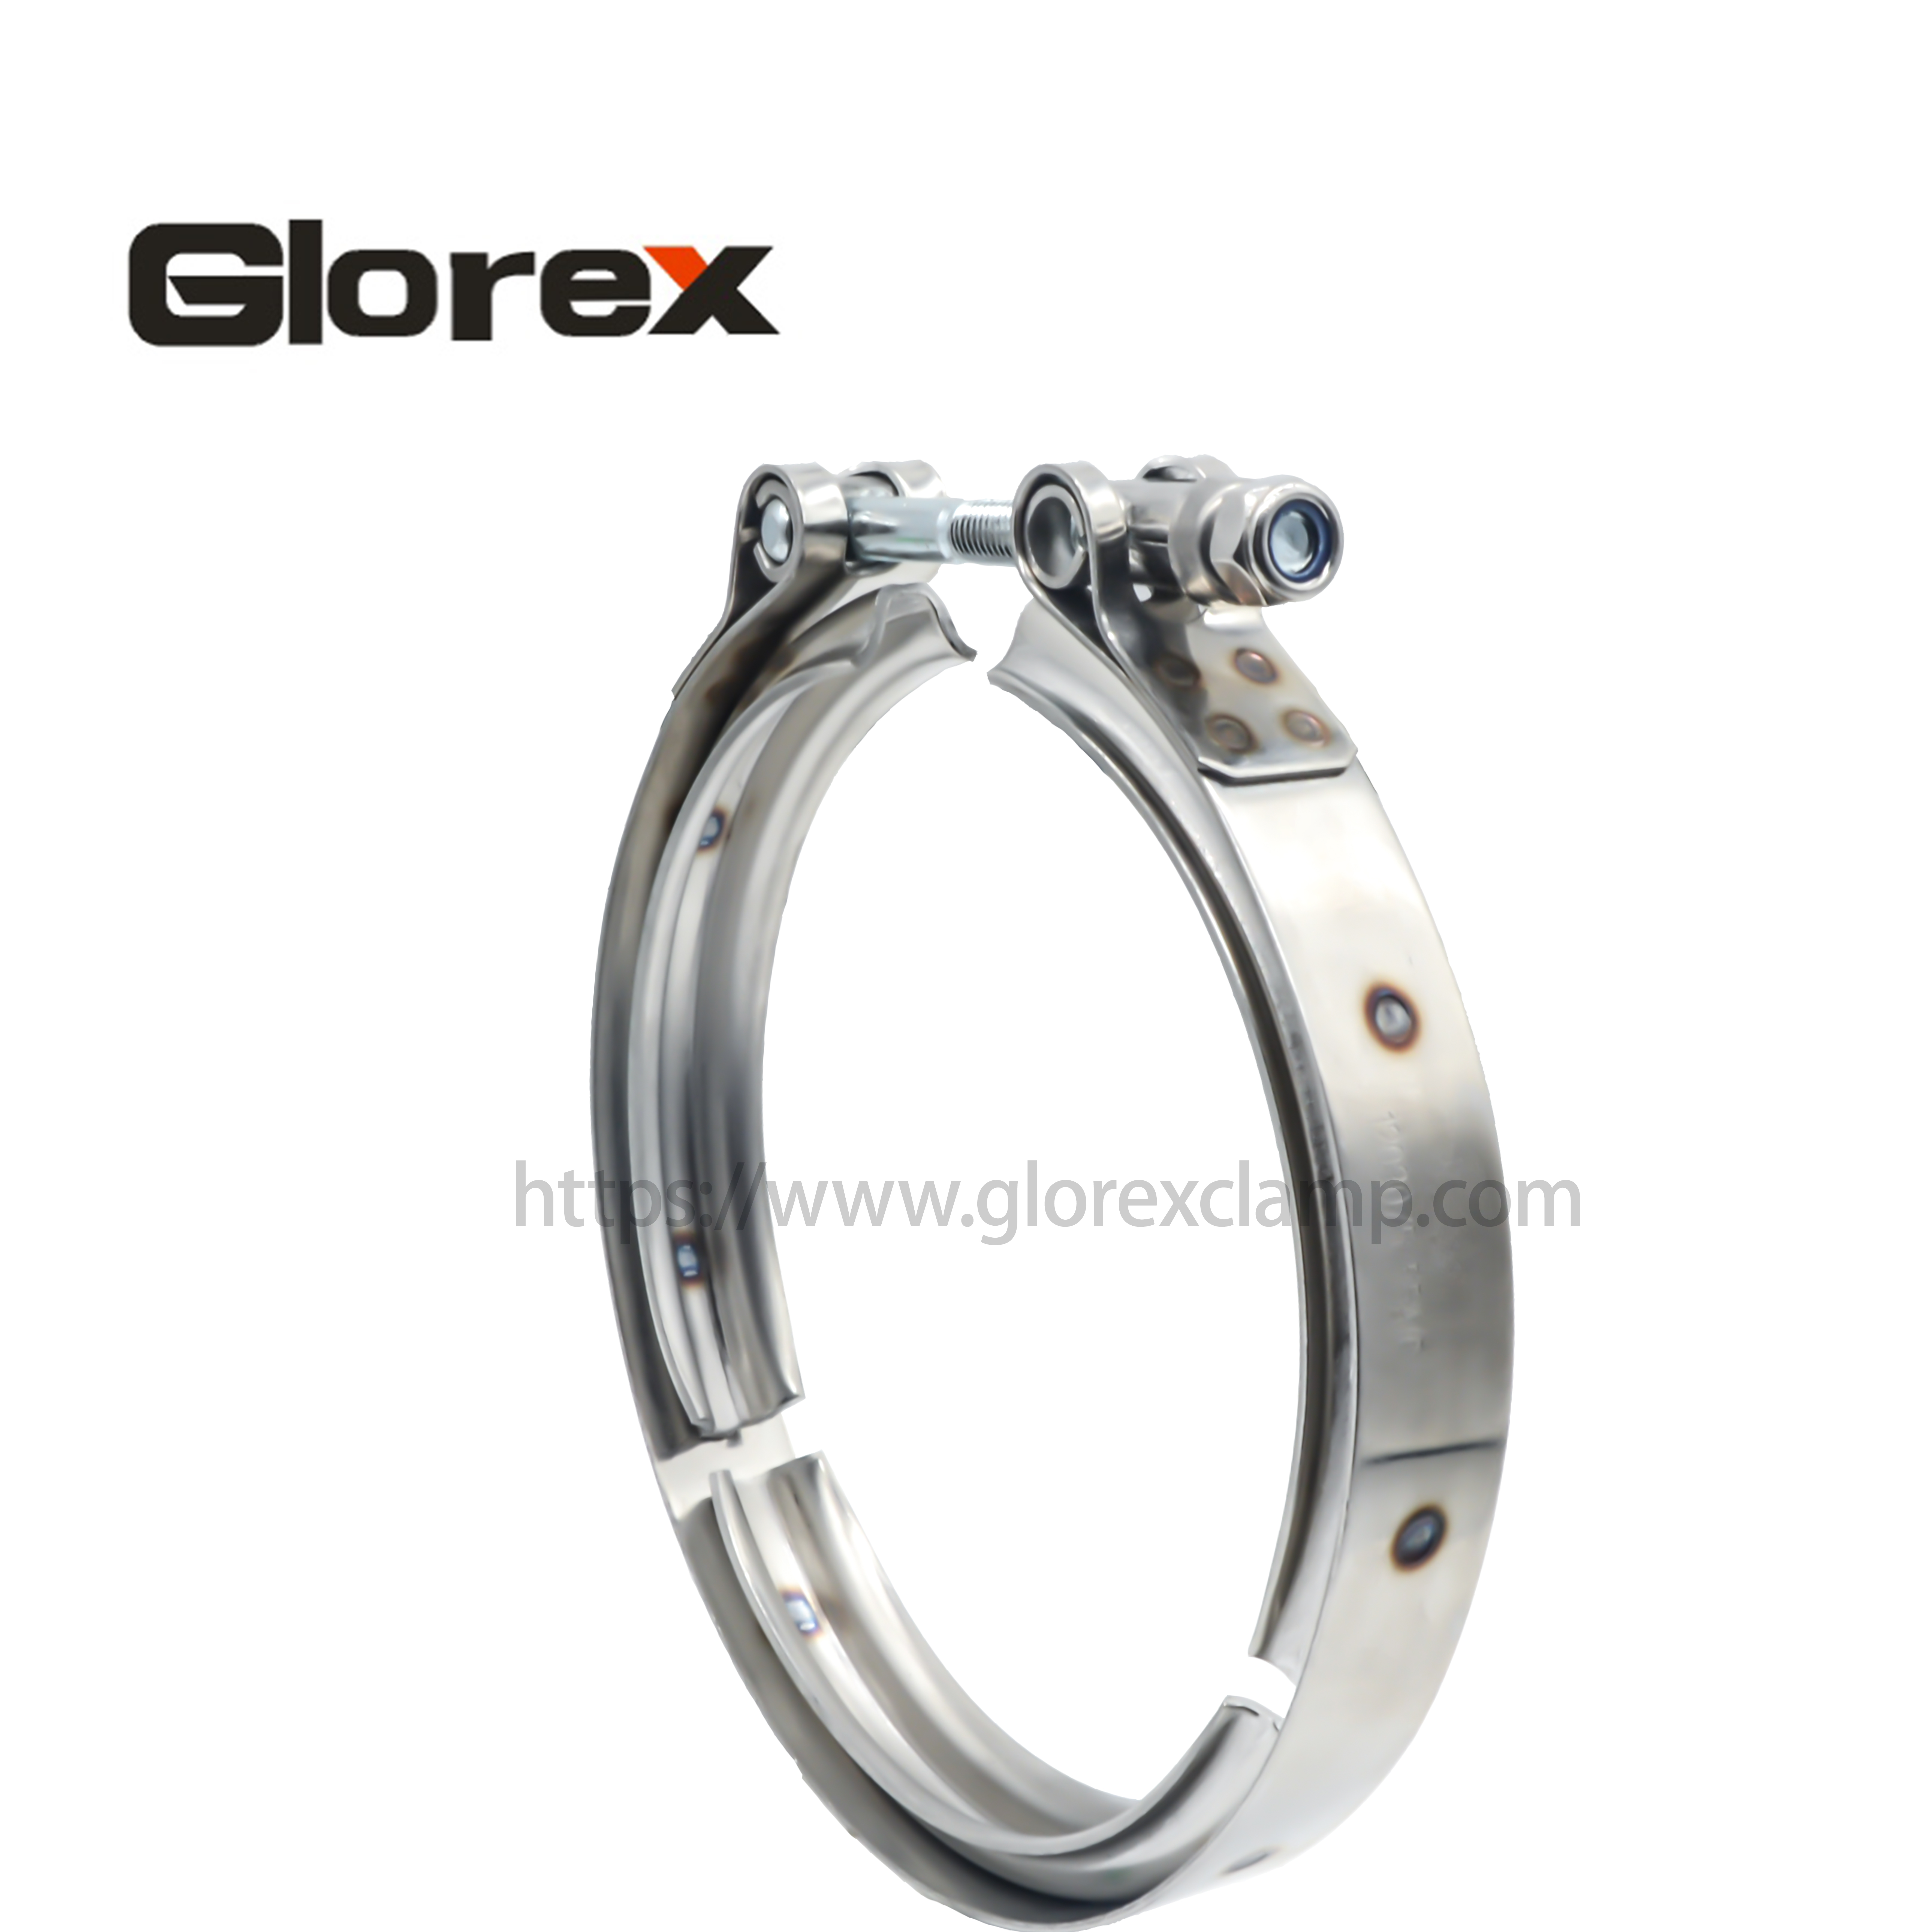 China Factory for Flexible Hose Clamp - V-band clamp – Glorex